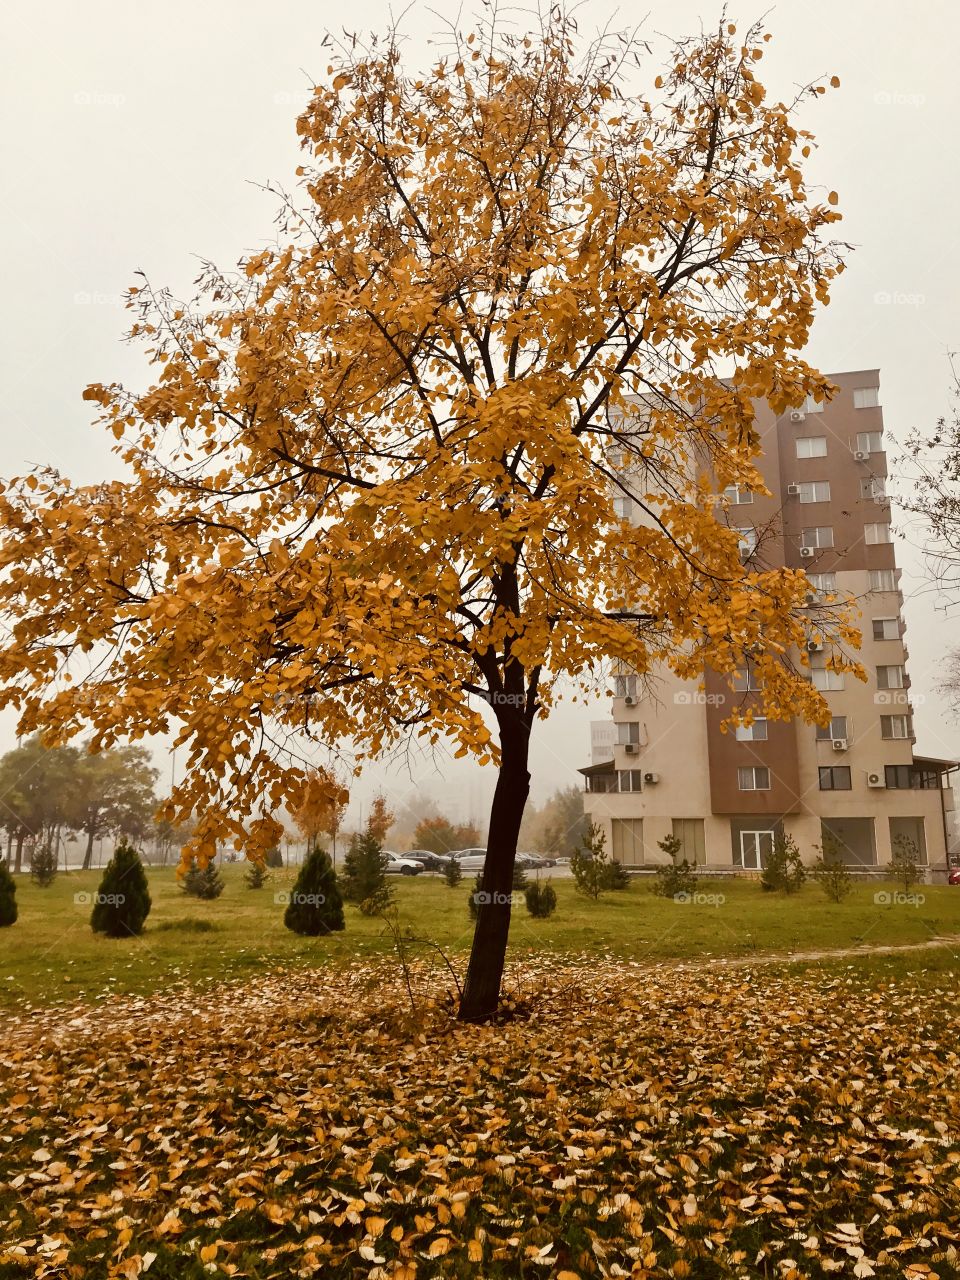 Just a tree in the Fall. 🍁